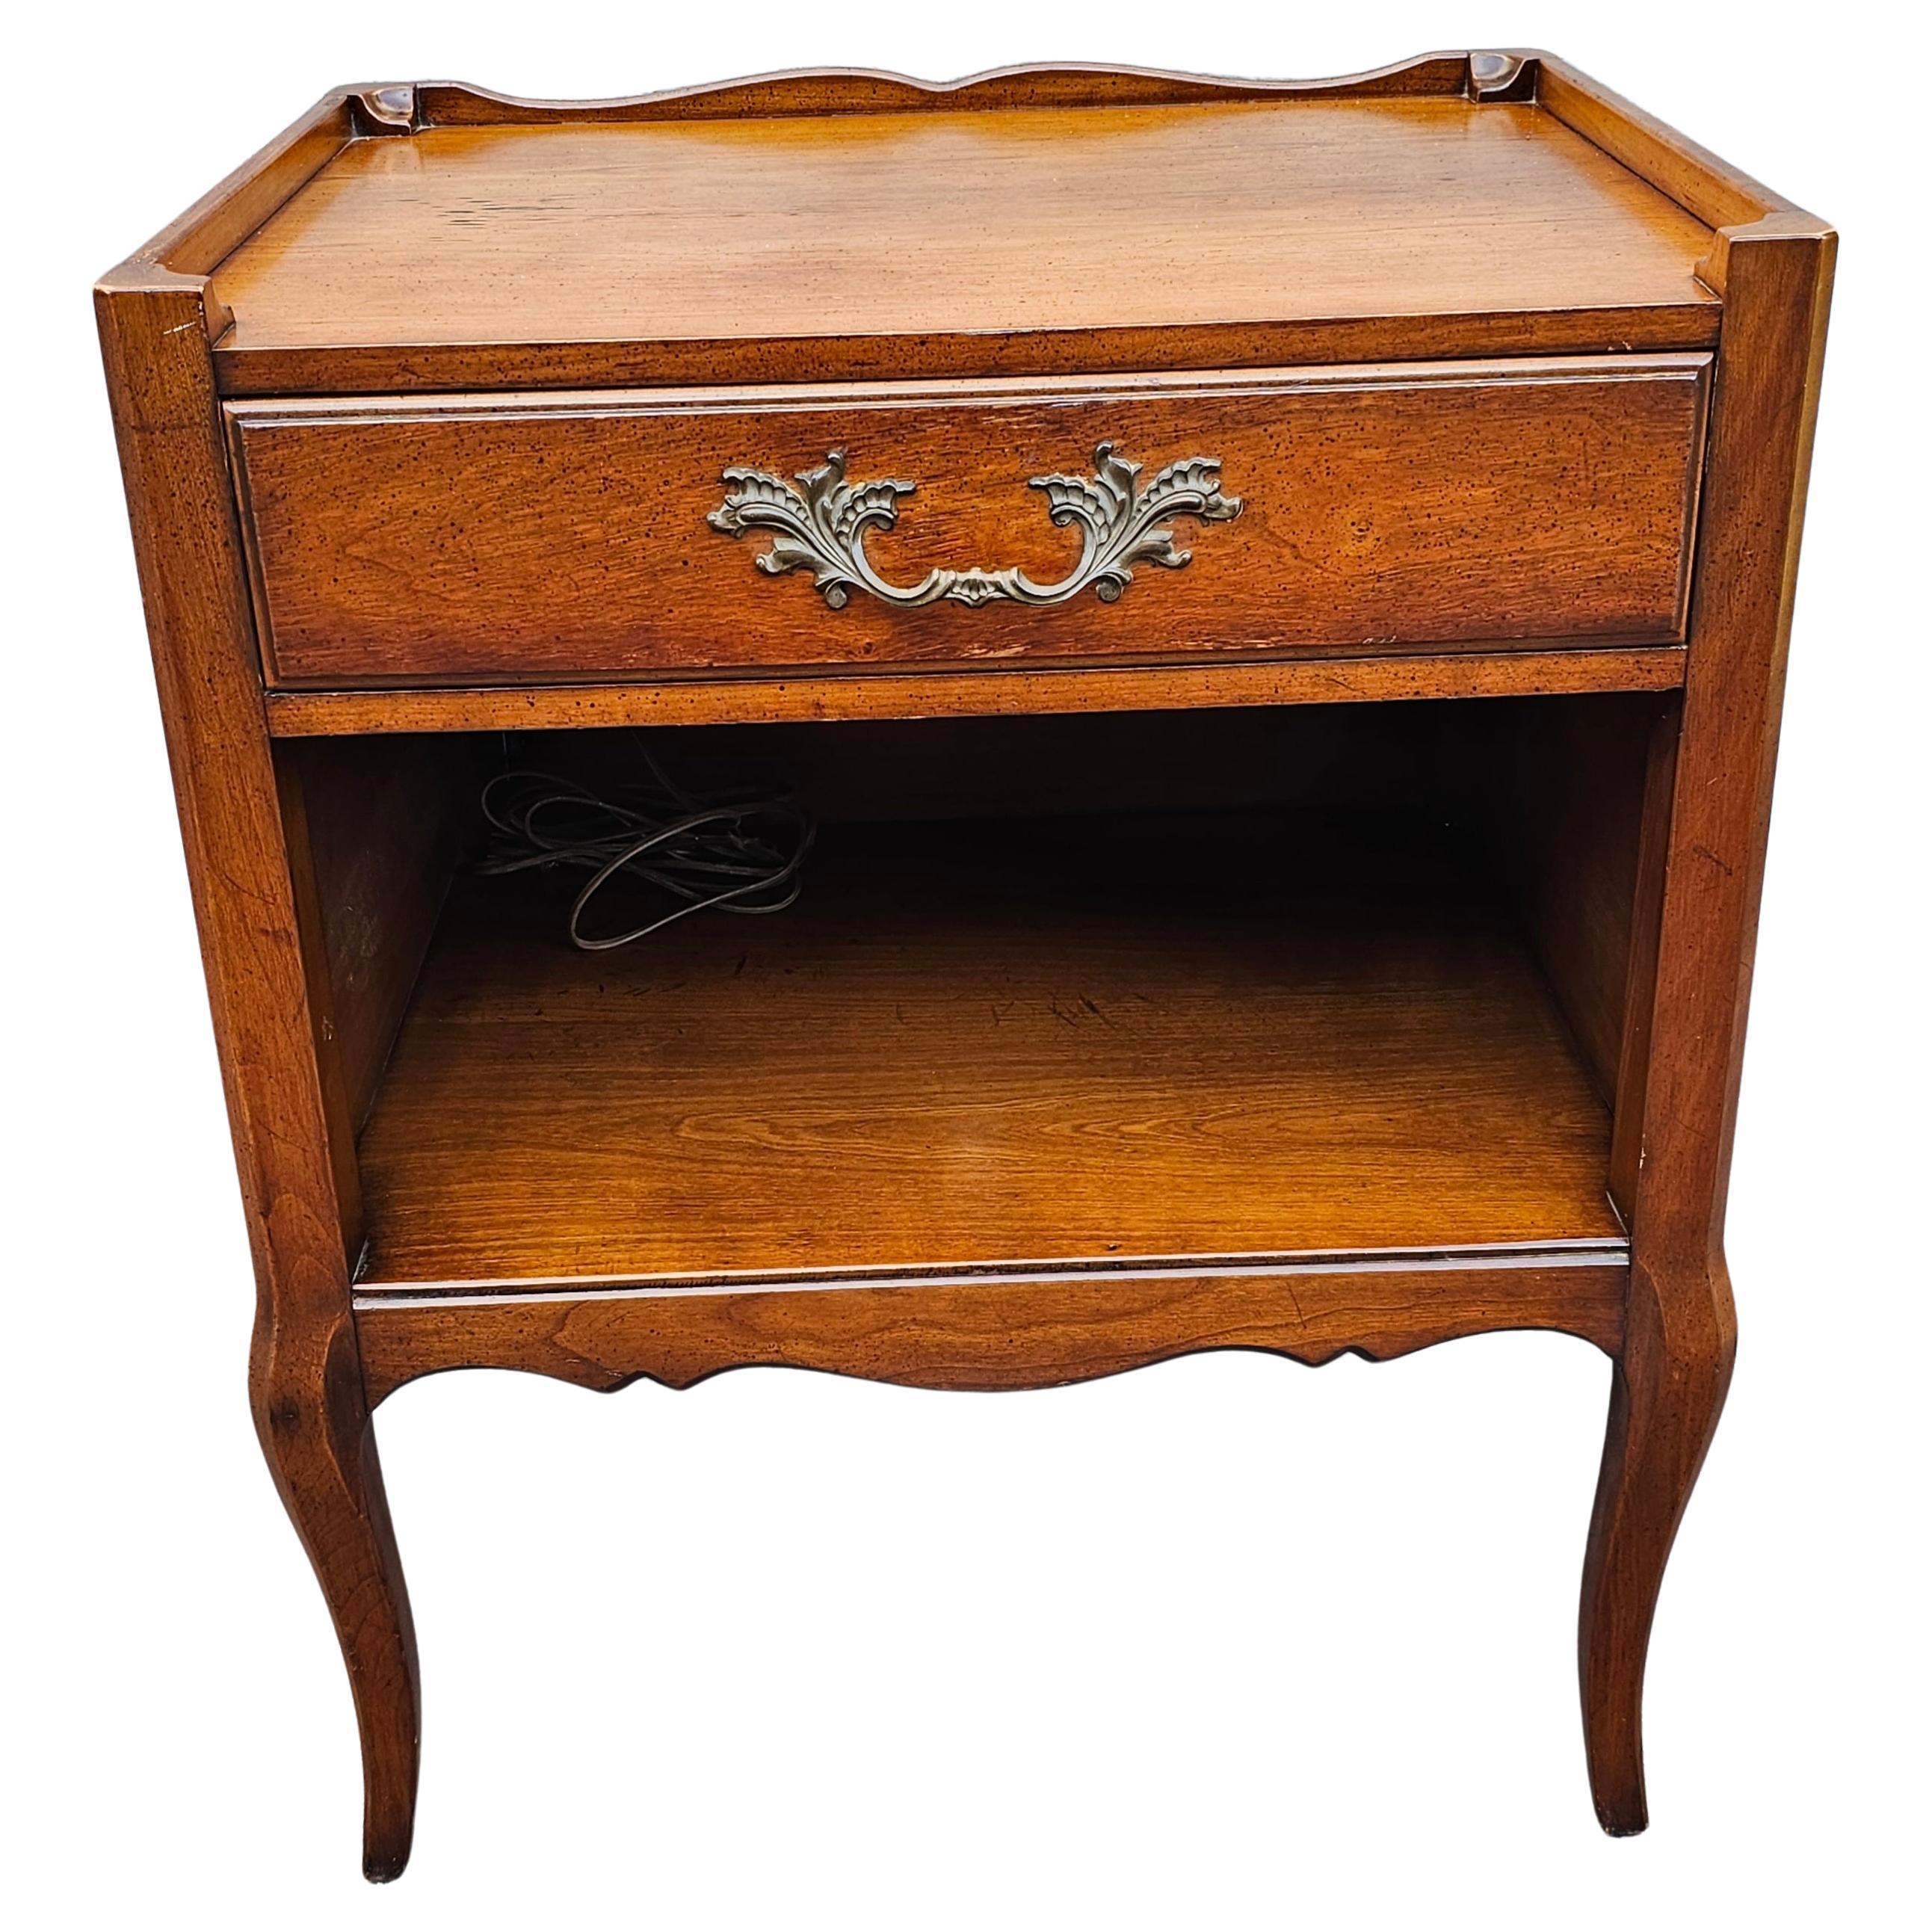 A mid 20th Century Hanredon Furniture French Walnut single drawer side table. Pre-wired for your table lamp and other electrical devices. Measures 22.5